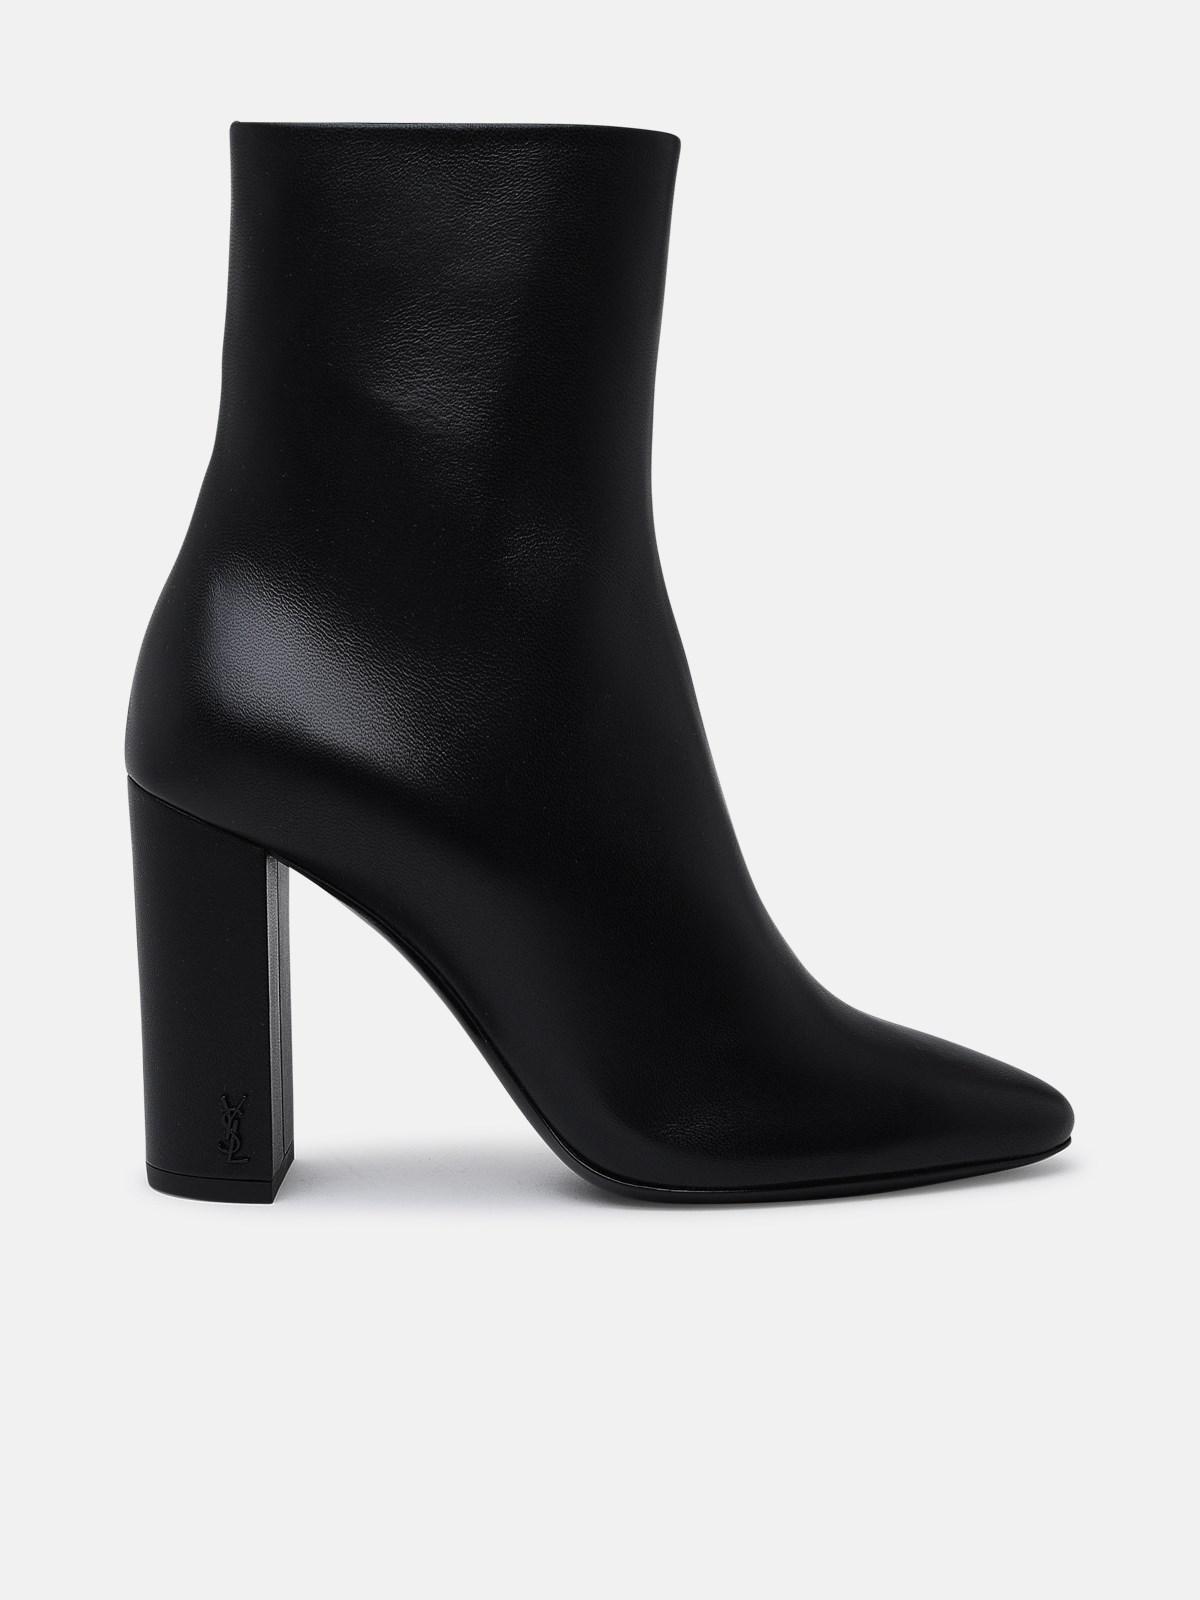 Saint Laurent Lou Leather Ankle Boots in Black | Lyst